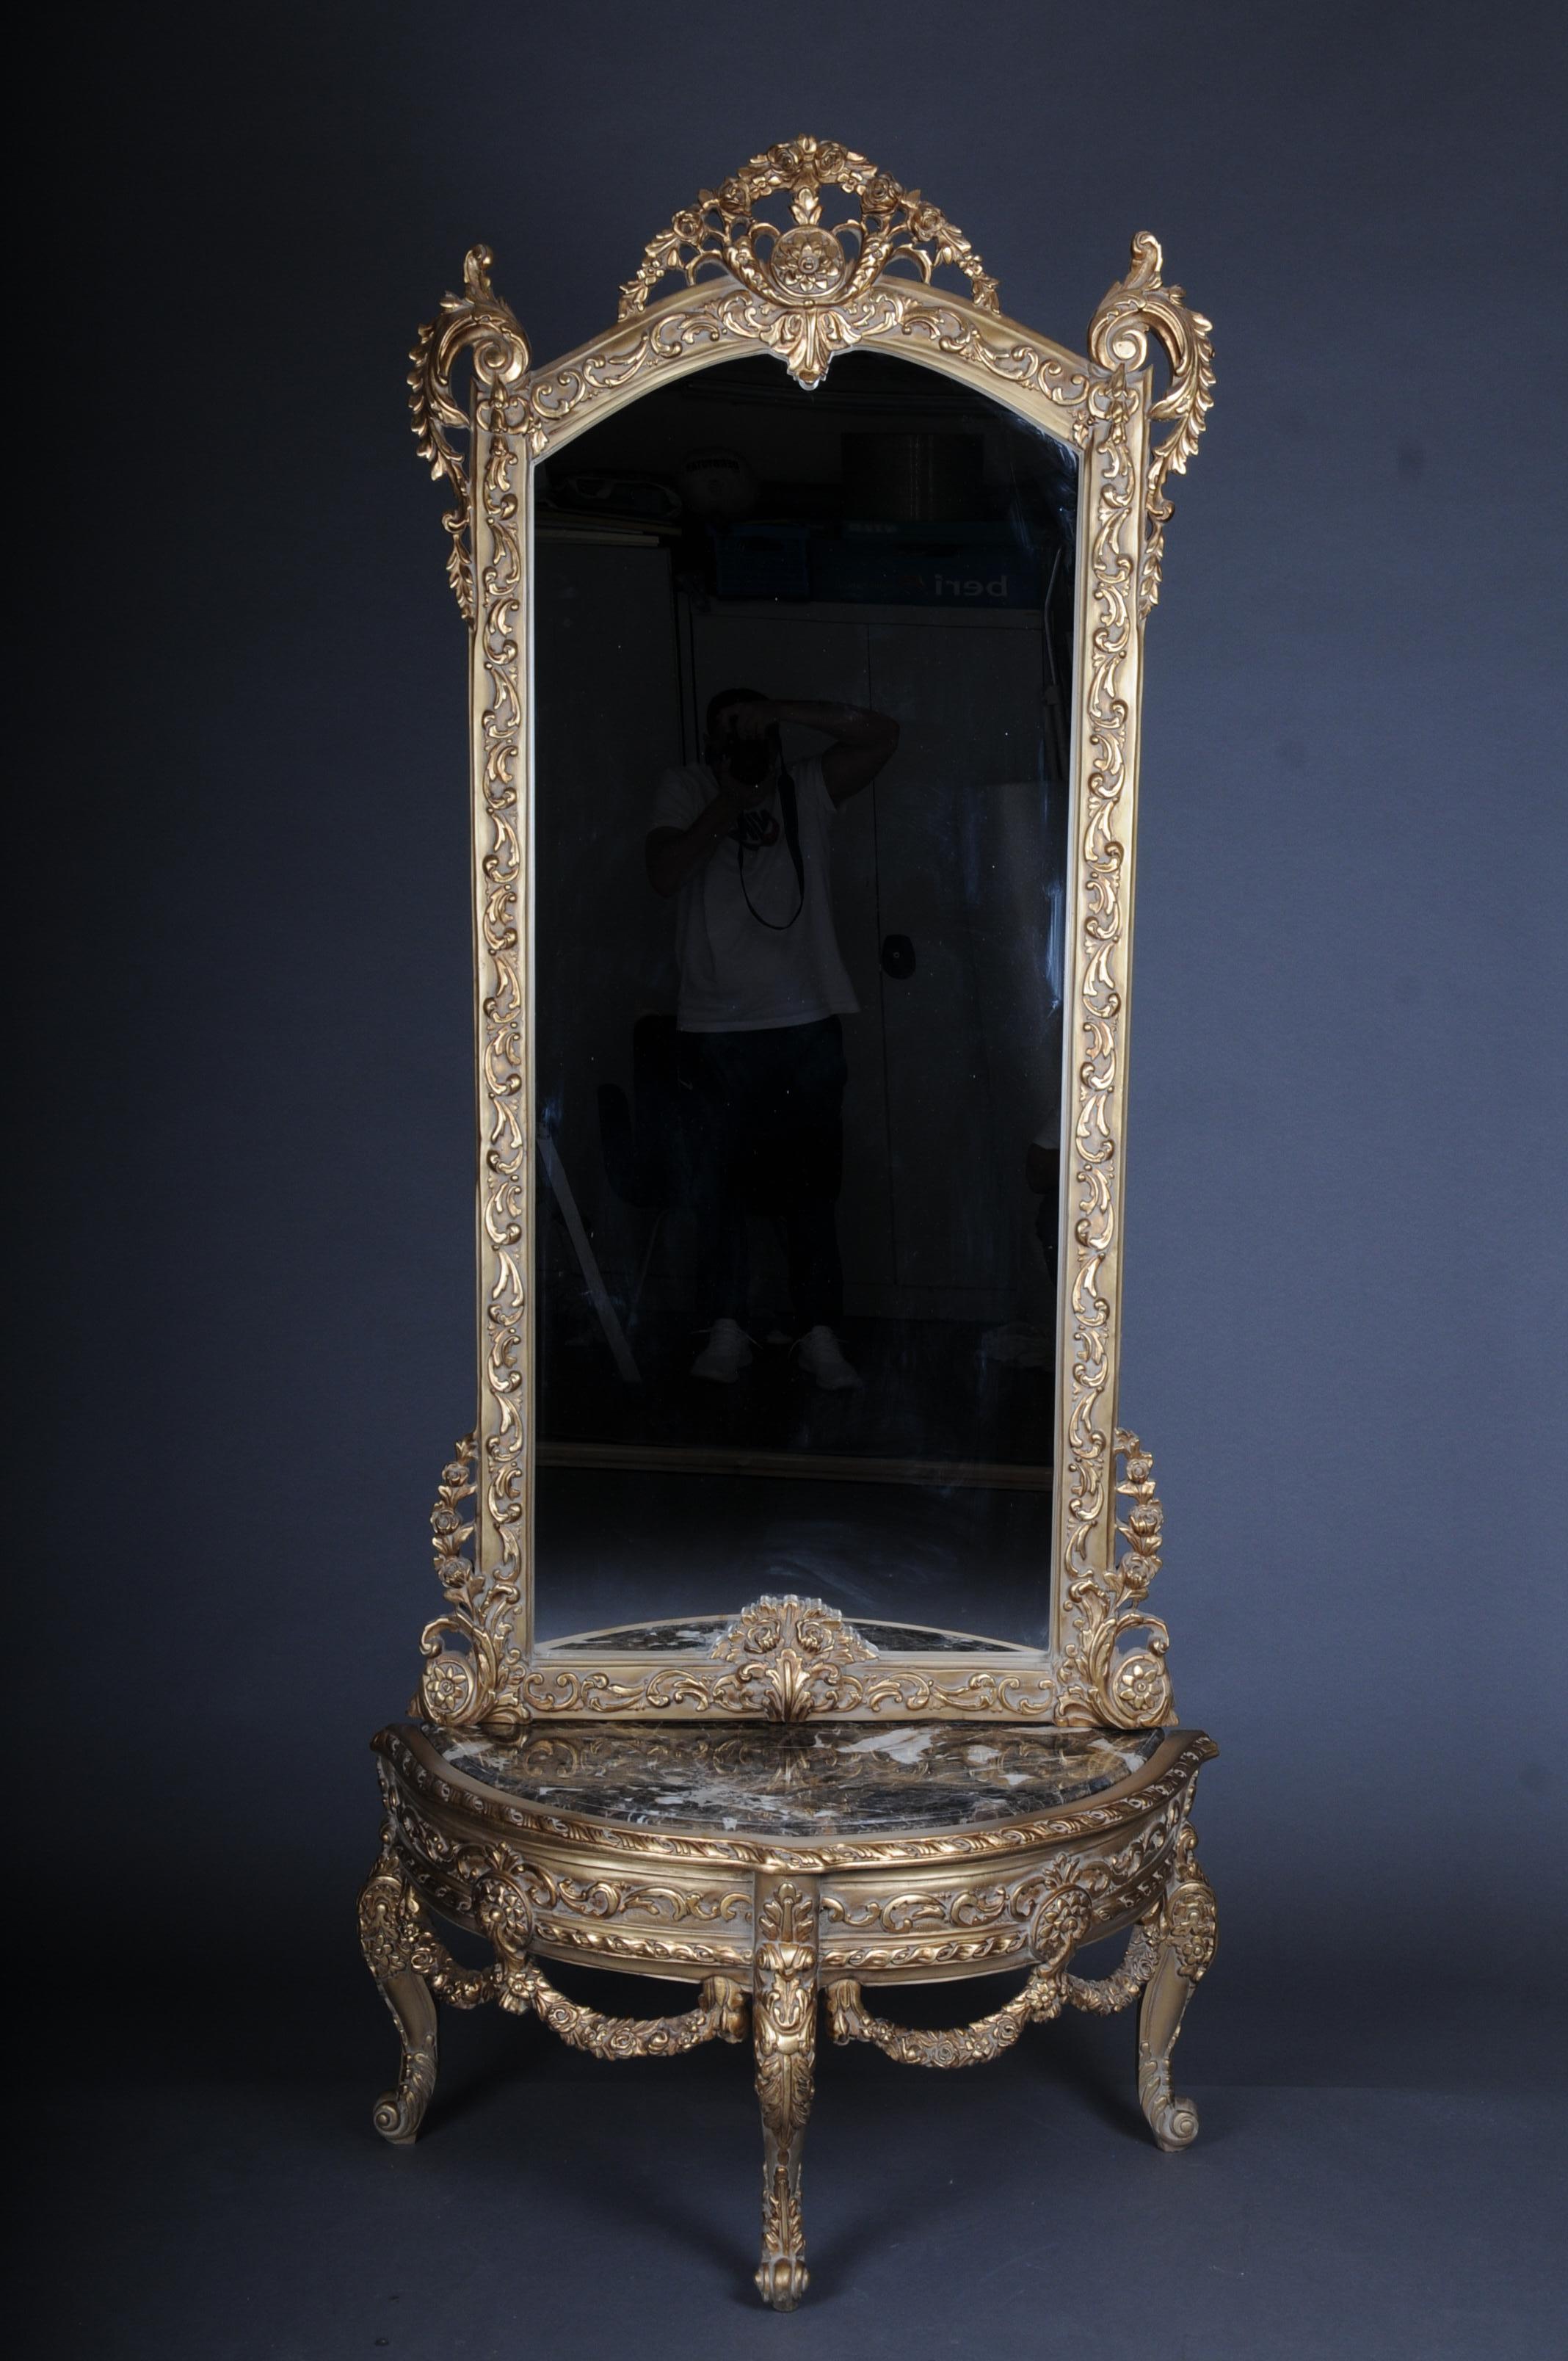 20th Century beautiful console mirror/floor mirror in the Louis XV, gilt

Solid beechwood, carved and painted. Semicircular high-rectangular body on conical, fluted legs. Cambered frame with surrounding carvings, inlaid marble top. High